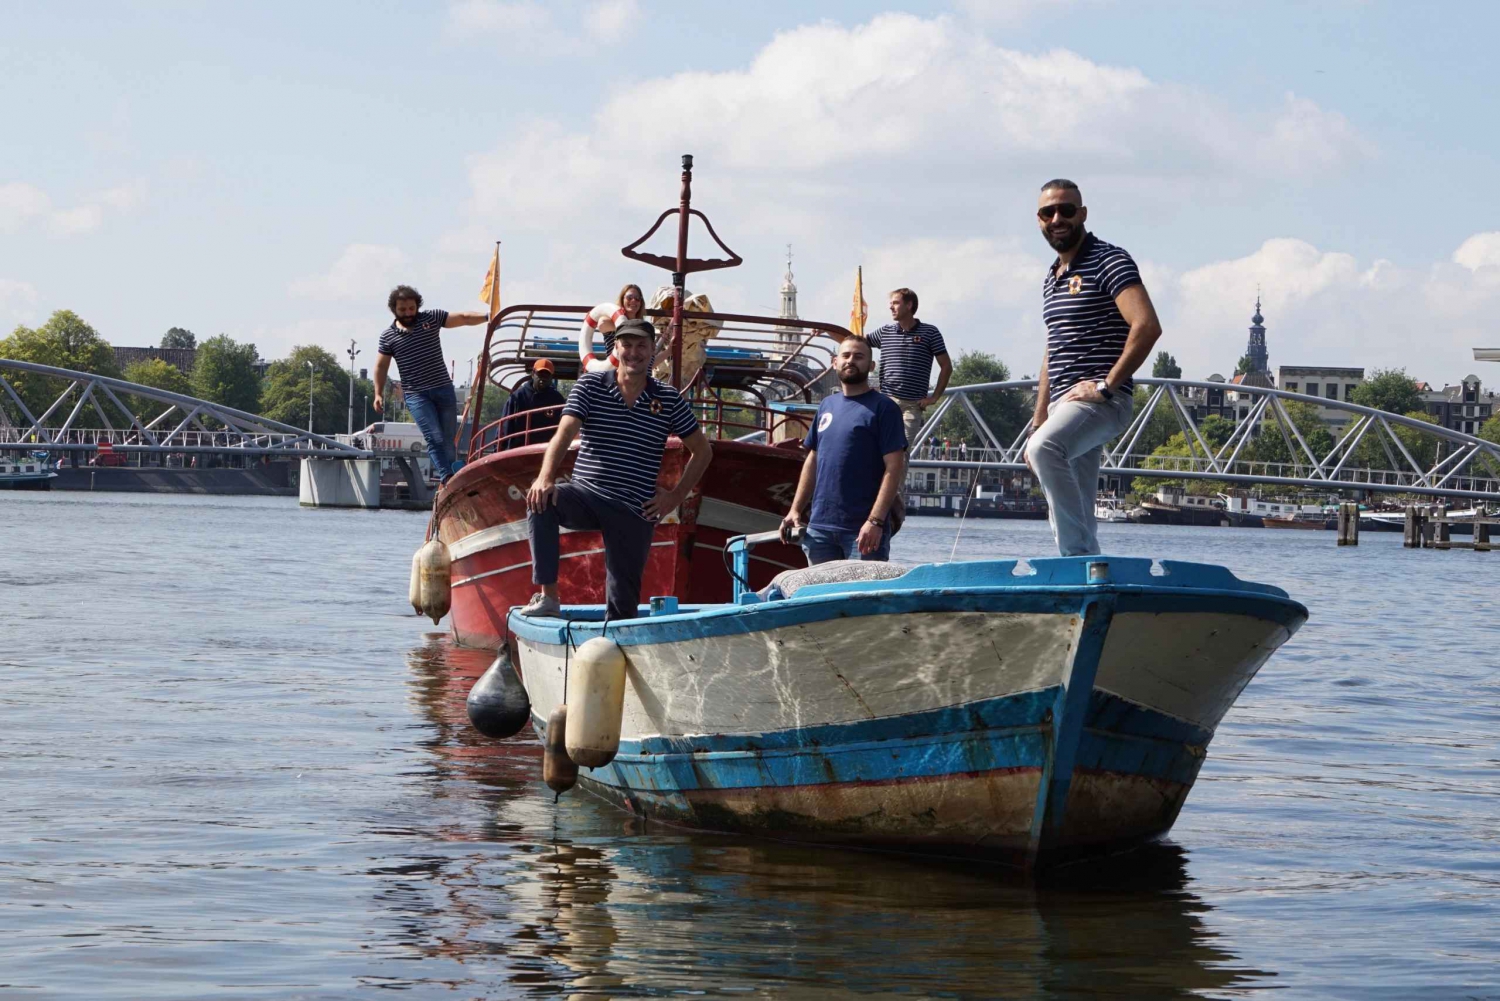 Amsterdam: Canal Cruise on a Wooden Refugee Boat